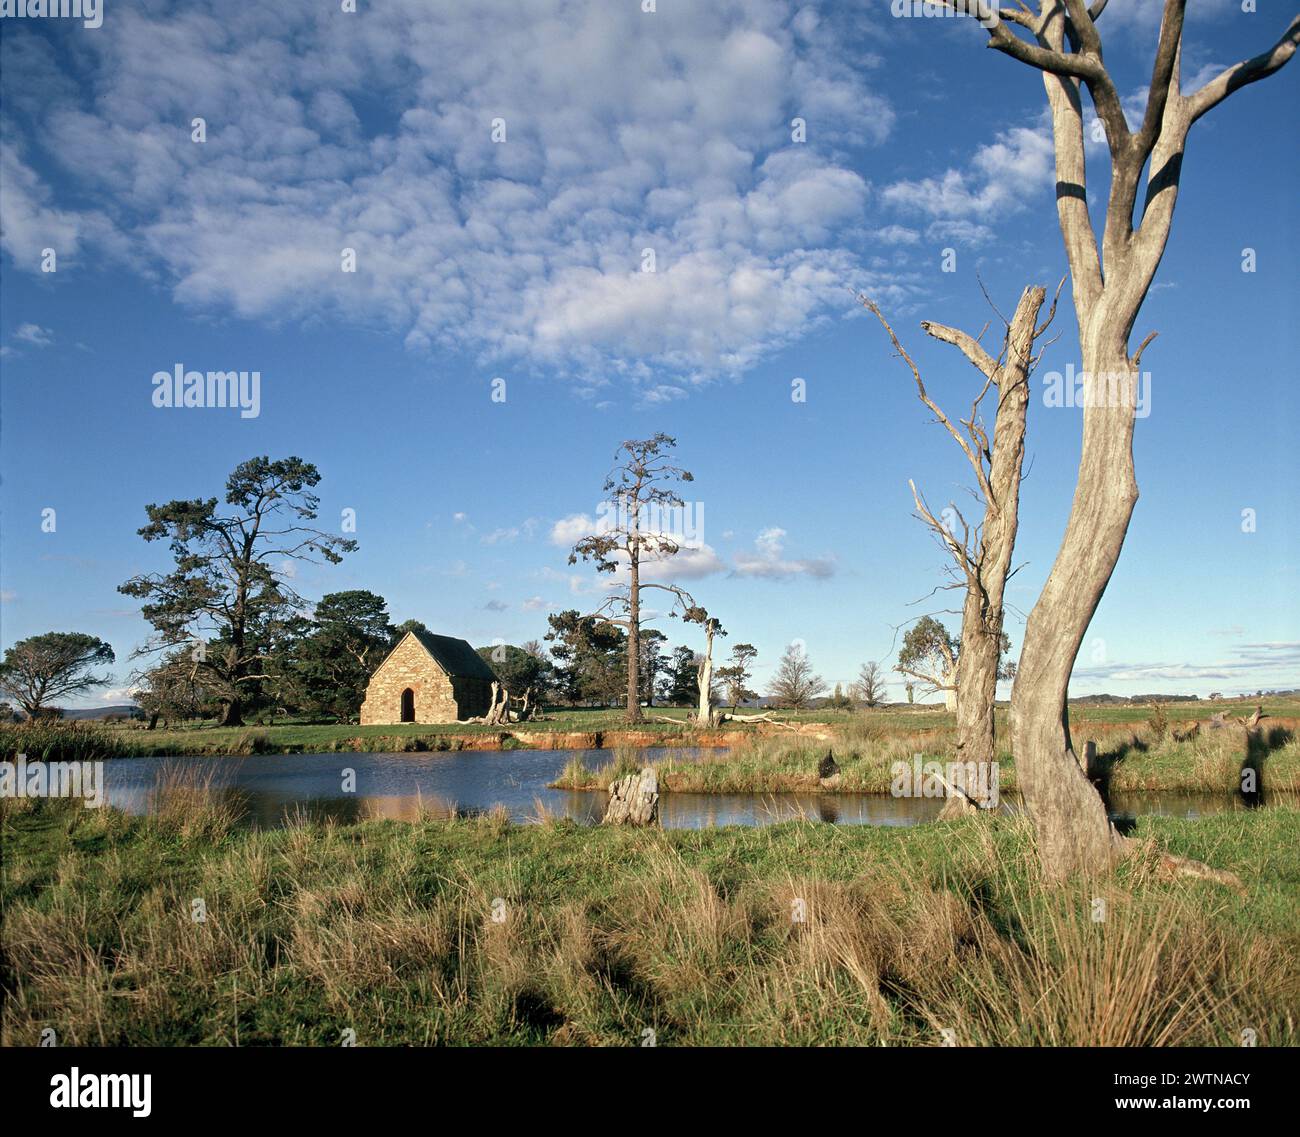 Australia. New South Wales. Goulburn region. Landscape with old stone barn. Stock Photo